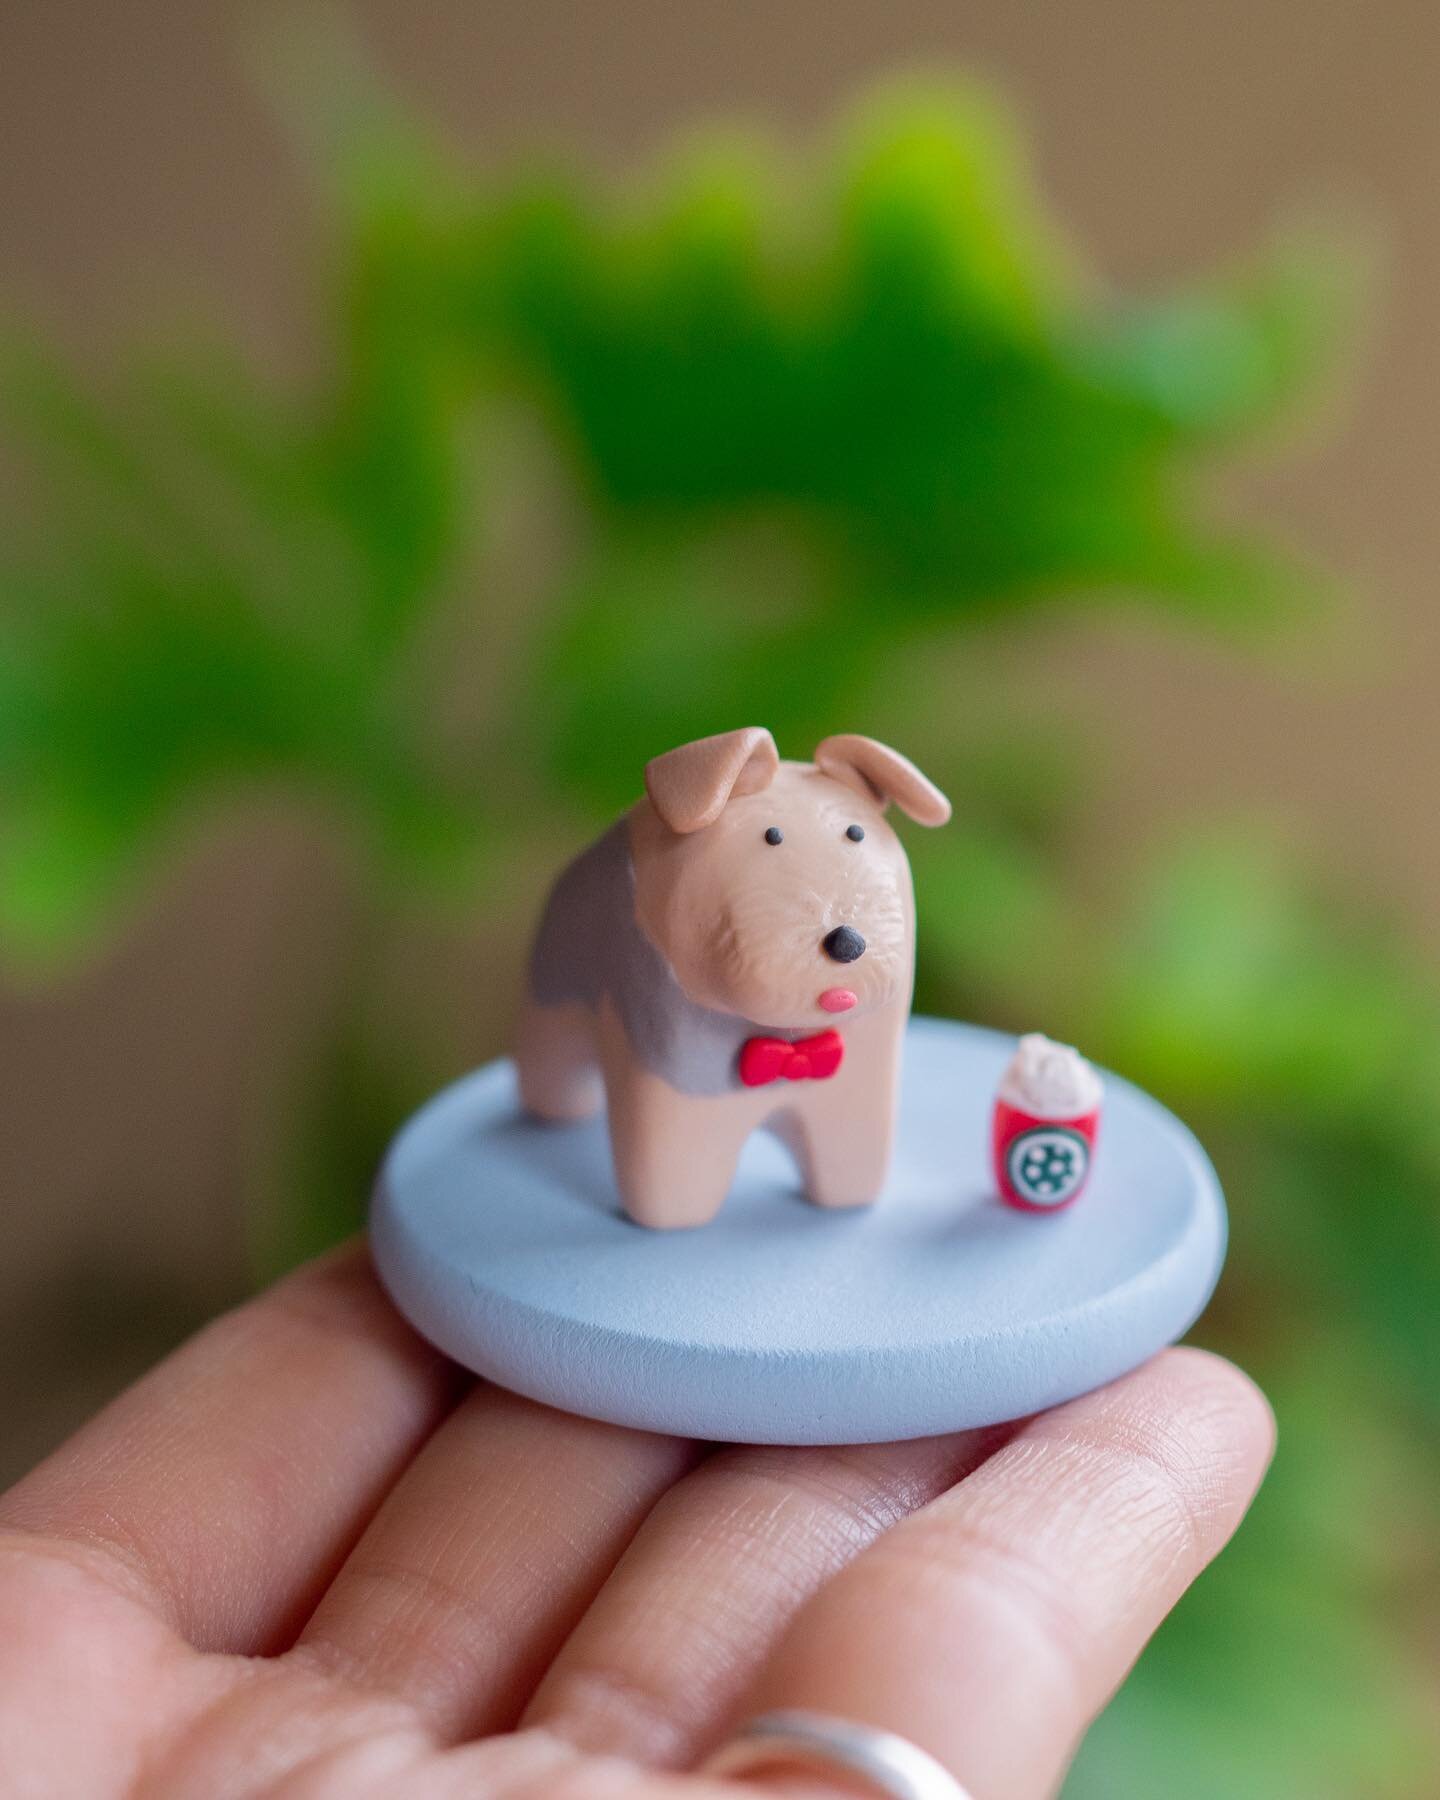 This order gave me a lot to think about💡

I have a specific clay sculpting style and do not replicate every single detail of a pet's features, except for the most prominent ones like coat color combinations.

But there was no way to make this mini l